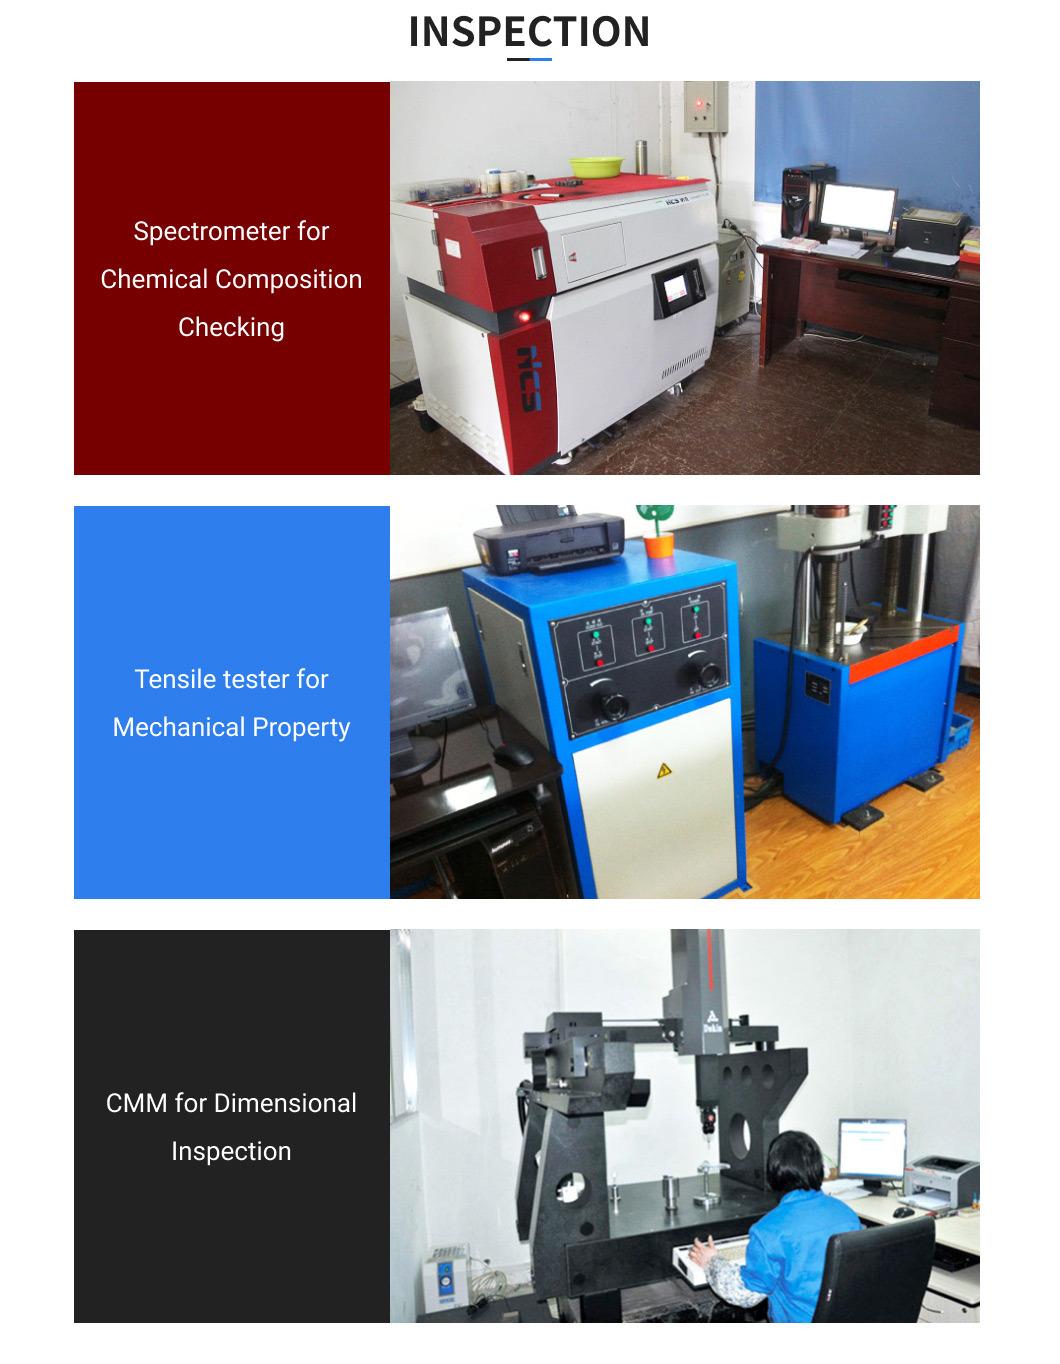 Factory Price CNC Machining New Practical OEM Casting